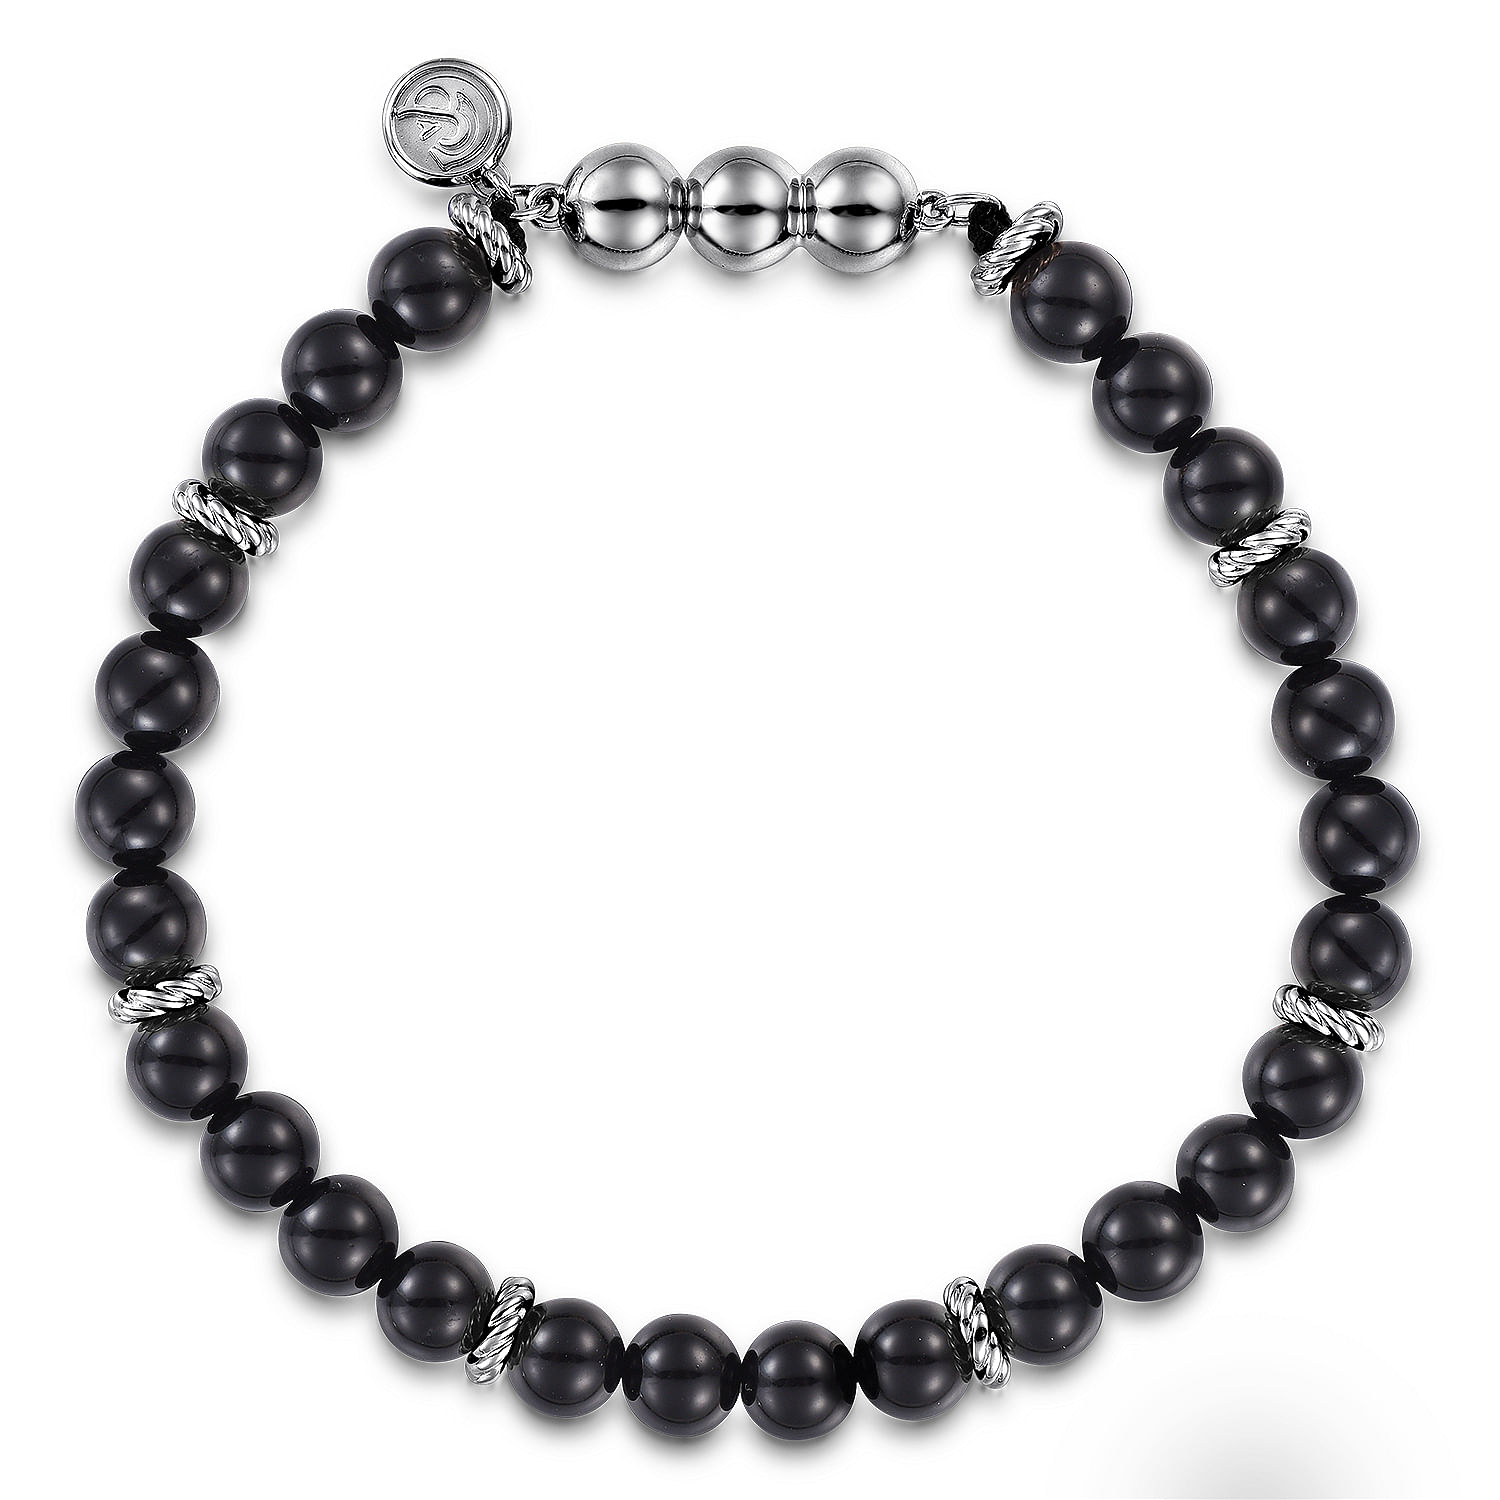 925 Sterling Silver and 6mm Black Onyx Beaded Bracelet